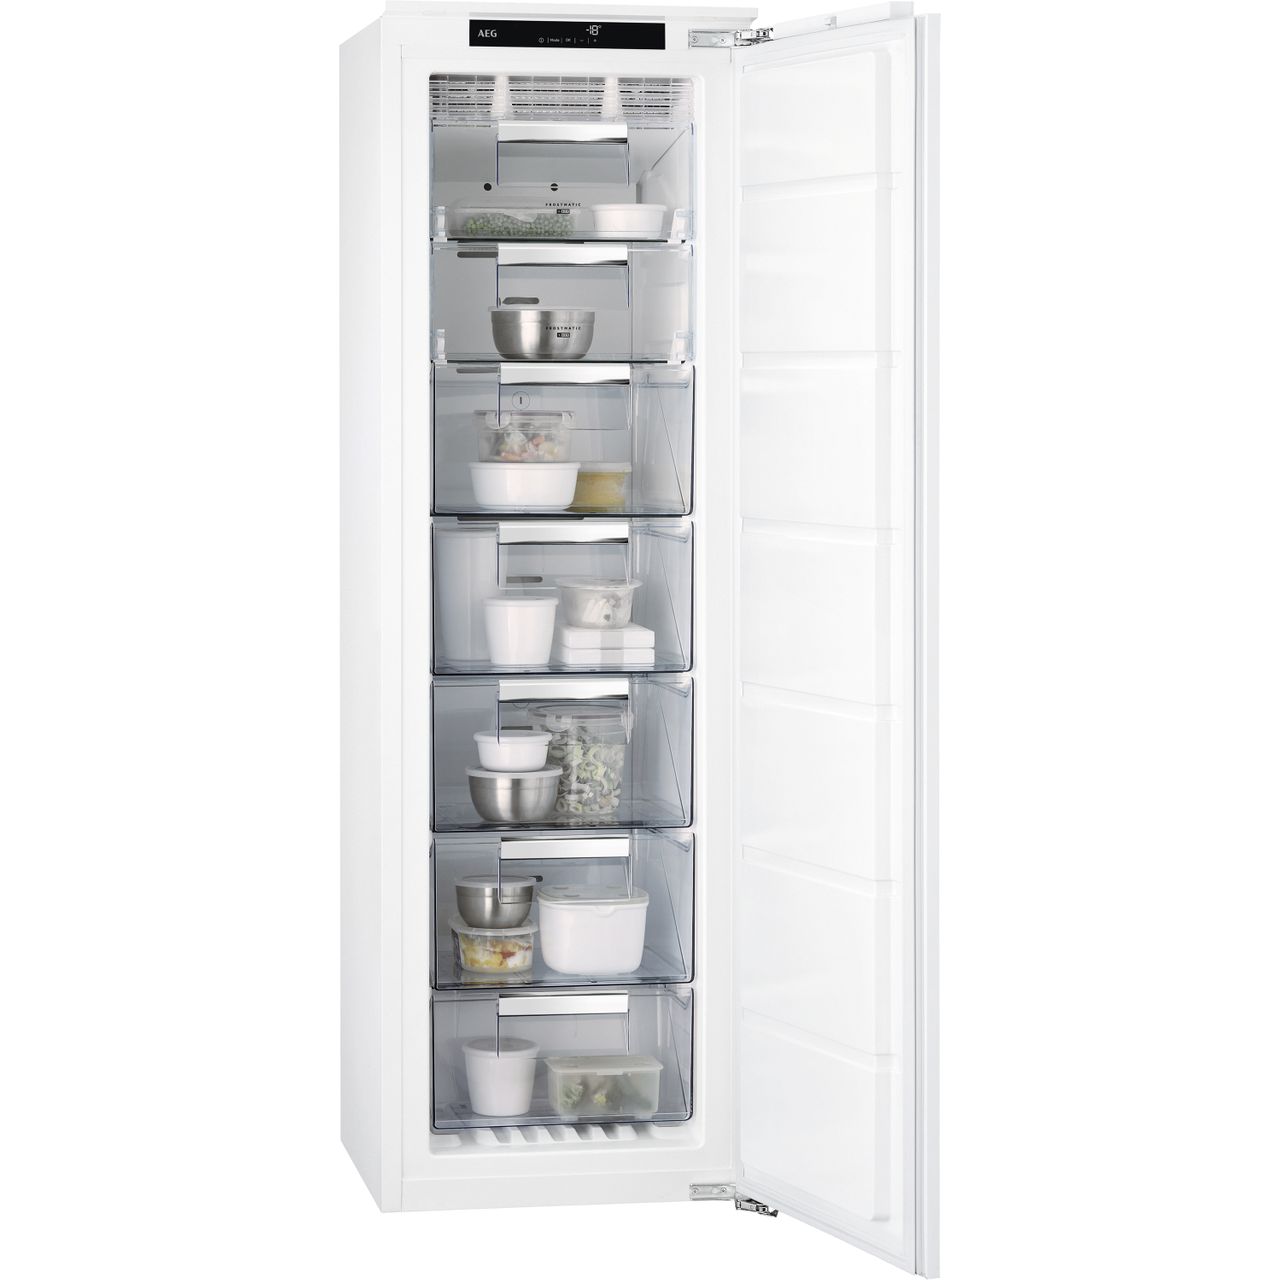 AEG ABB818F6NC Integrated Frost Free Upright Freezer with Fixed Door Fixing Kit Review